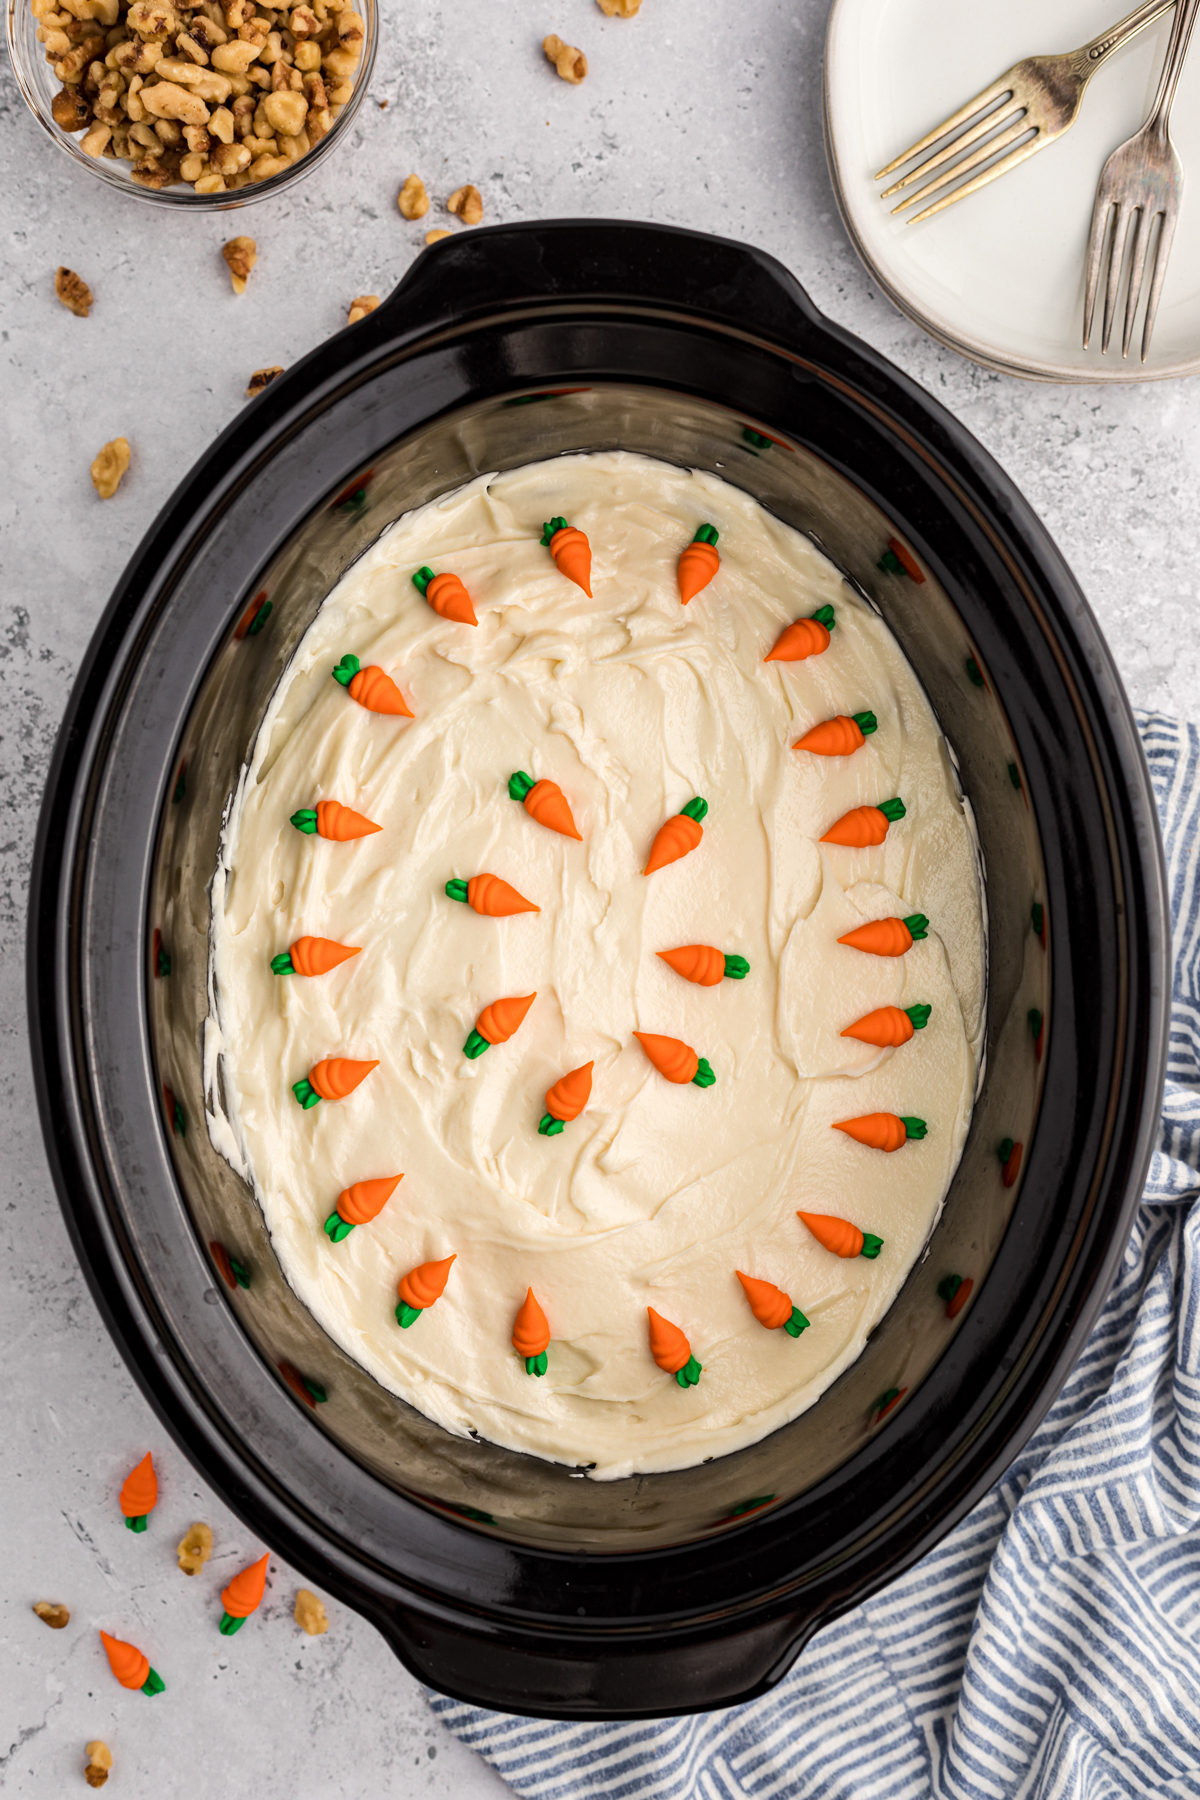 carrot cake with icing and carrots on top in a slow cooker.